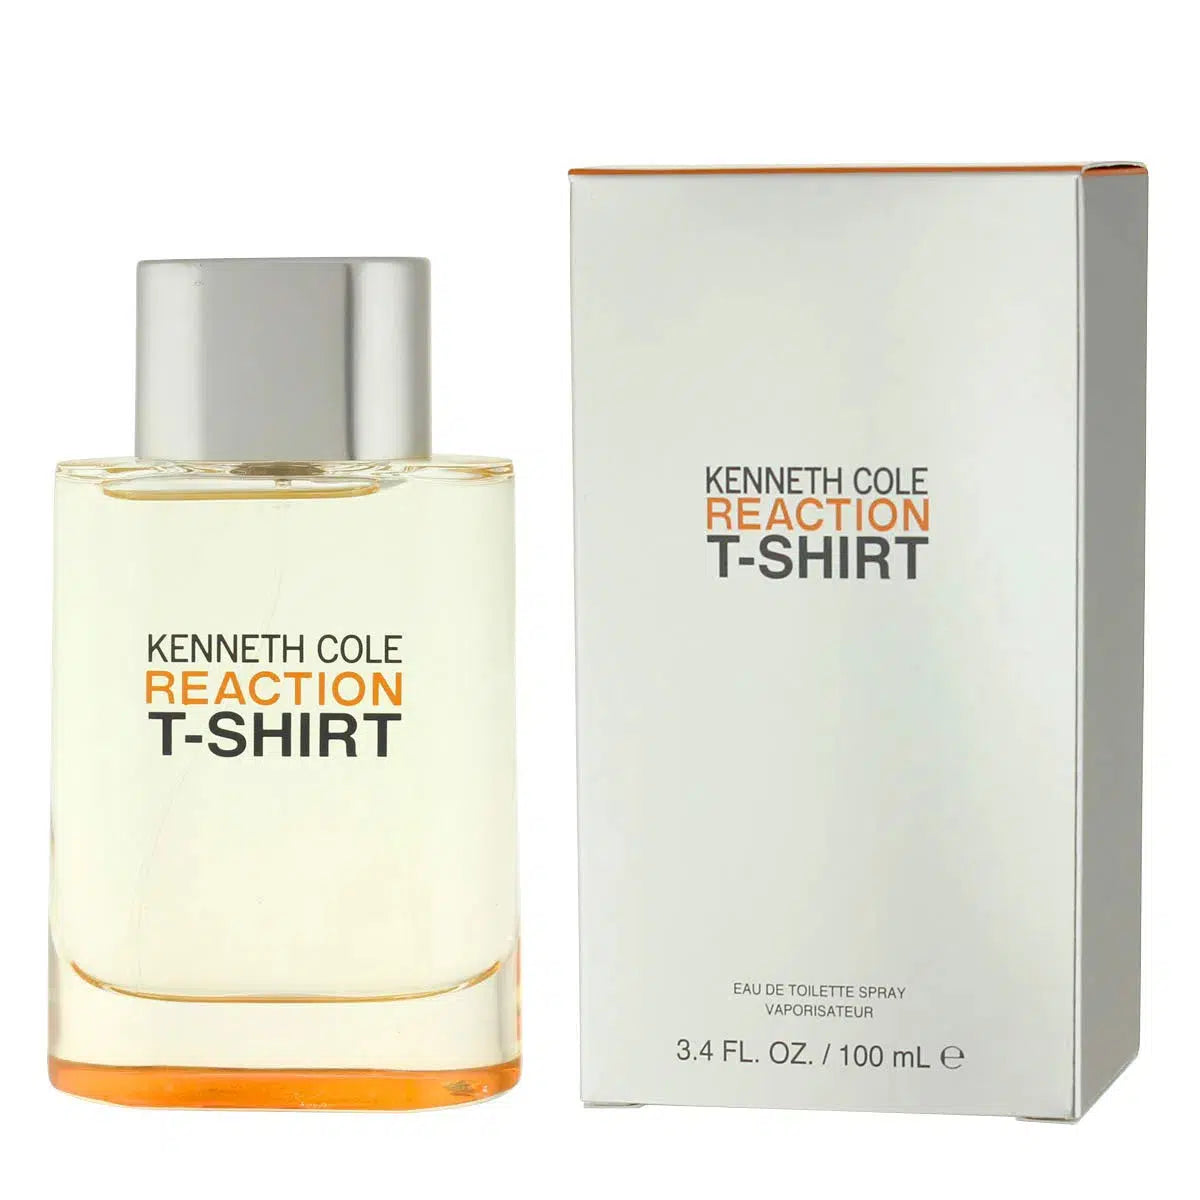 Kenneth Cole-Kenneth Cole Reaction T-Shirt EDT 100ml-Fragrance